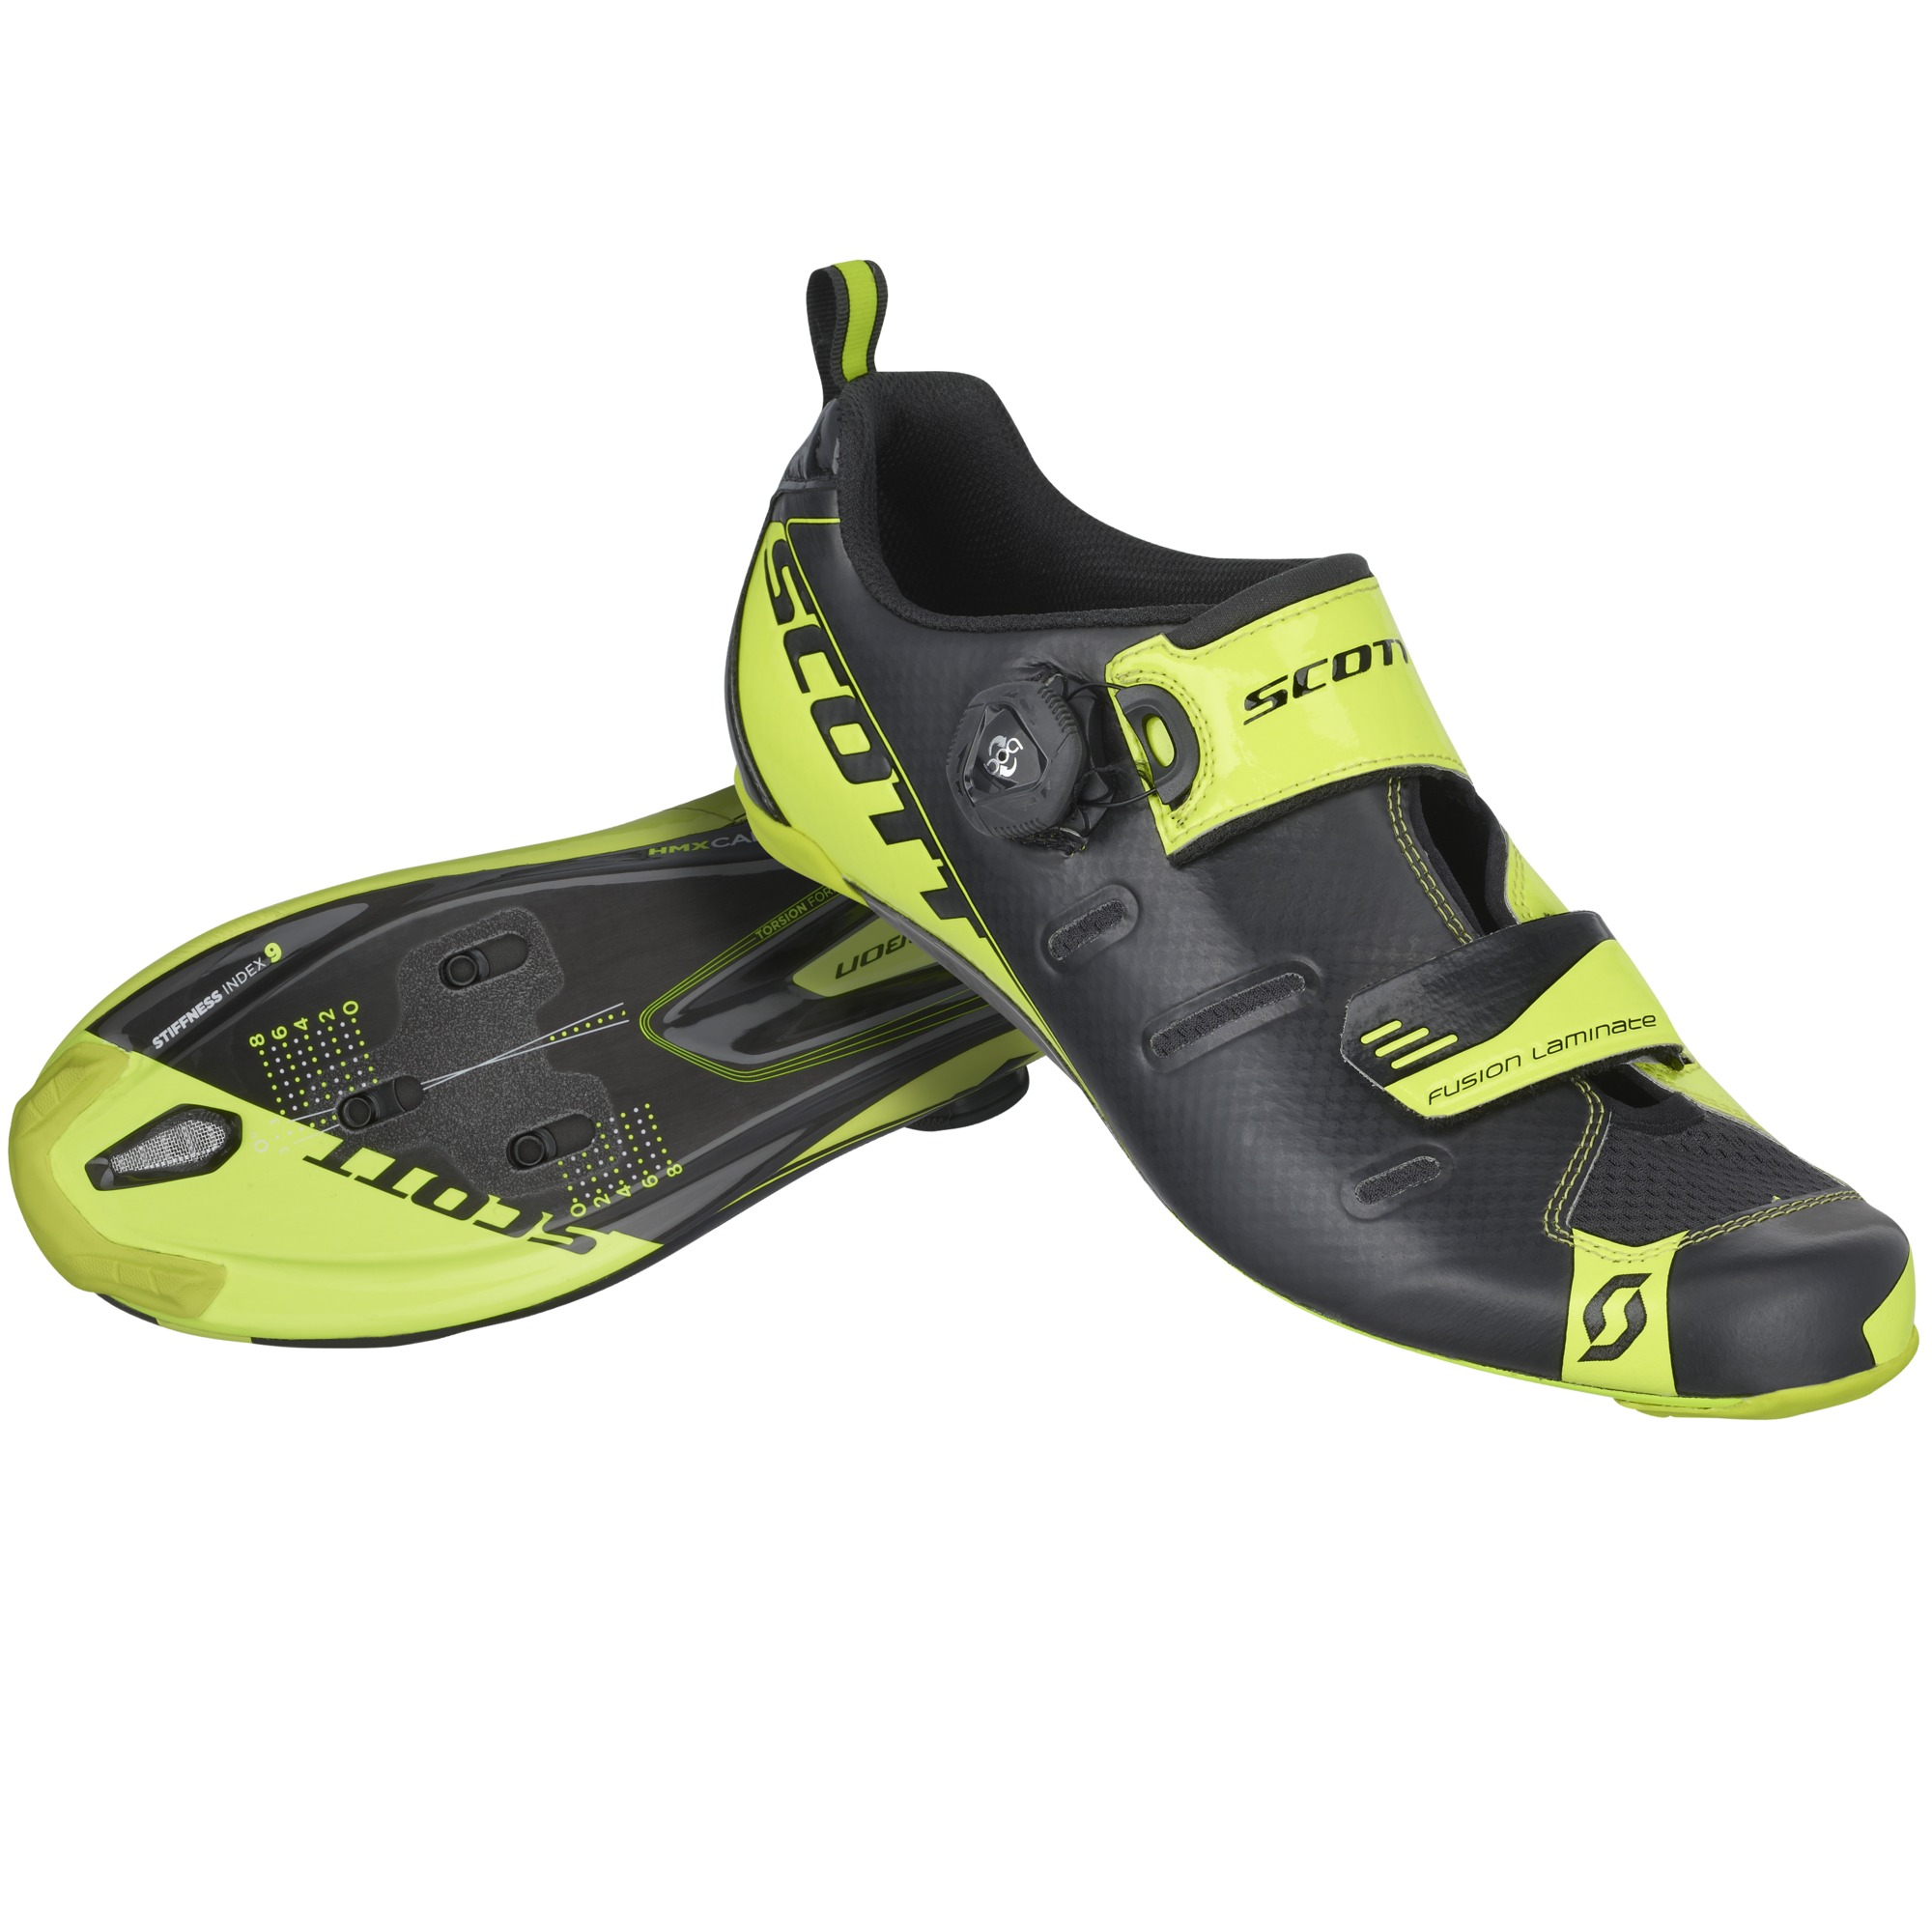 Rouse Pacific downstairs Scott Tri Carbon Shoe - Owen Cyclery | Chattanooga, TN